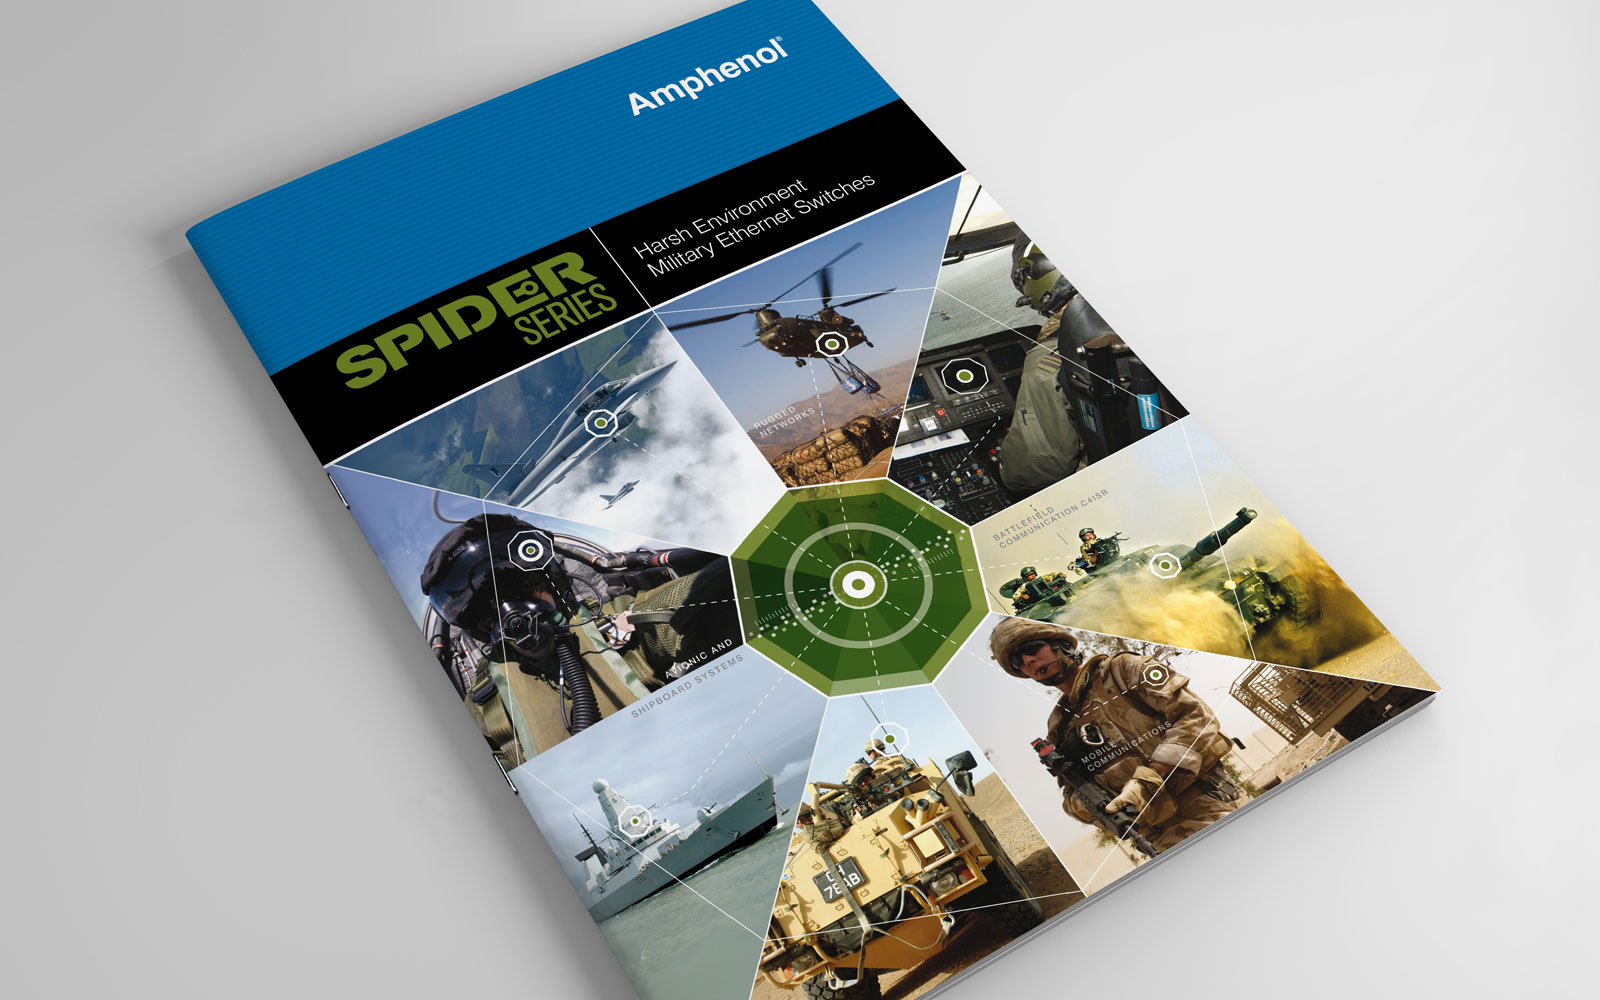 Buzzword creates a series of capability brochures for Amphenol